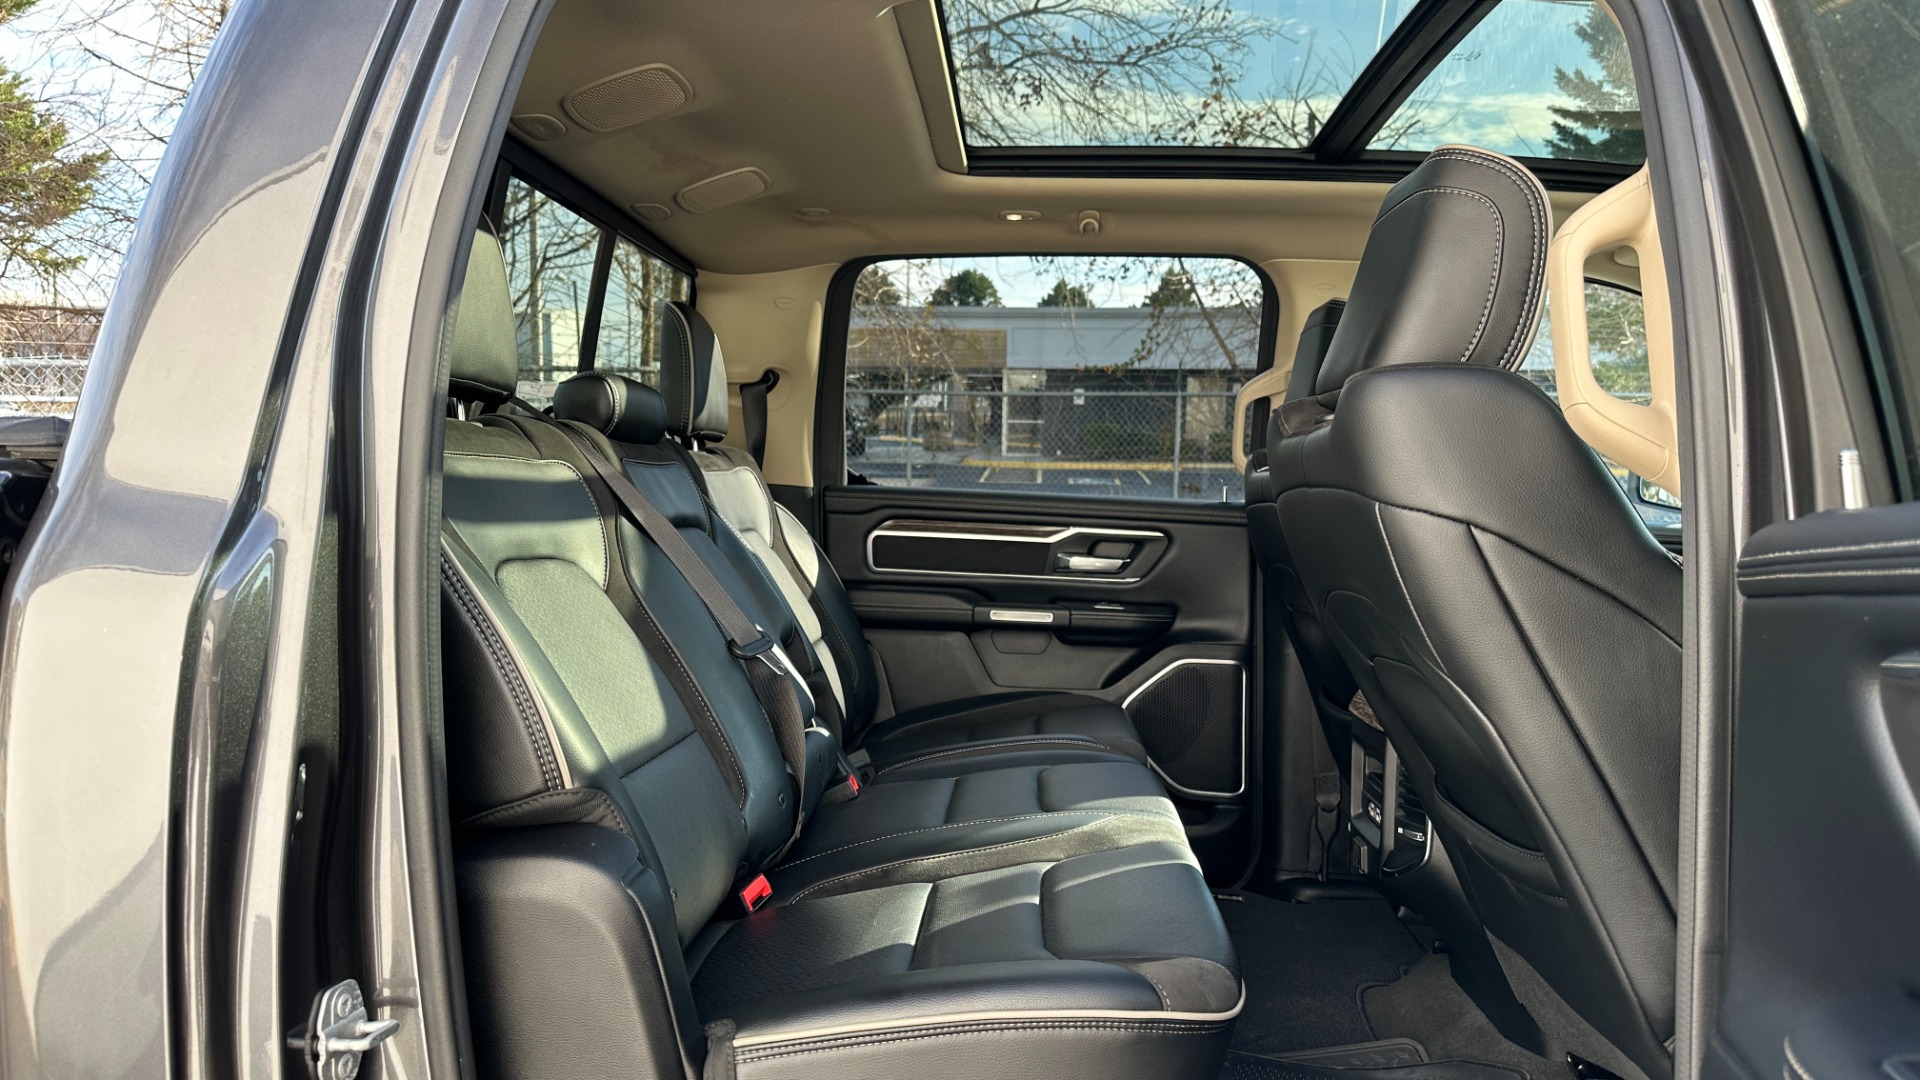 Used 2020 Ram 1500 LARAMIE / LEVEL 1 GROUP / PANORAMIC SUNROOF / 20IN WHEELS / LEATHER for sale $44,995 at Formula Imports in Charlotte NC 28227 30